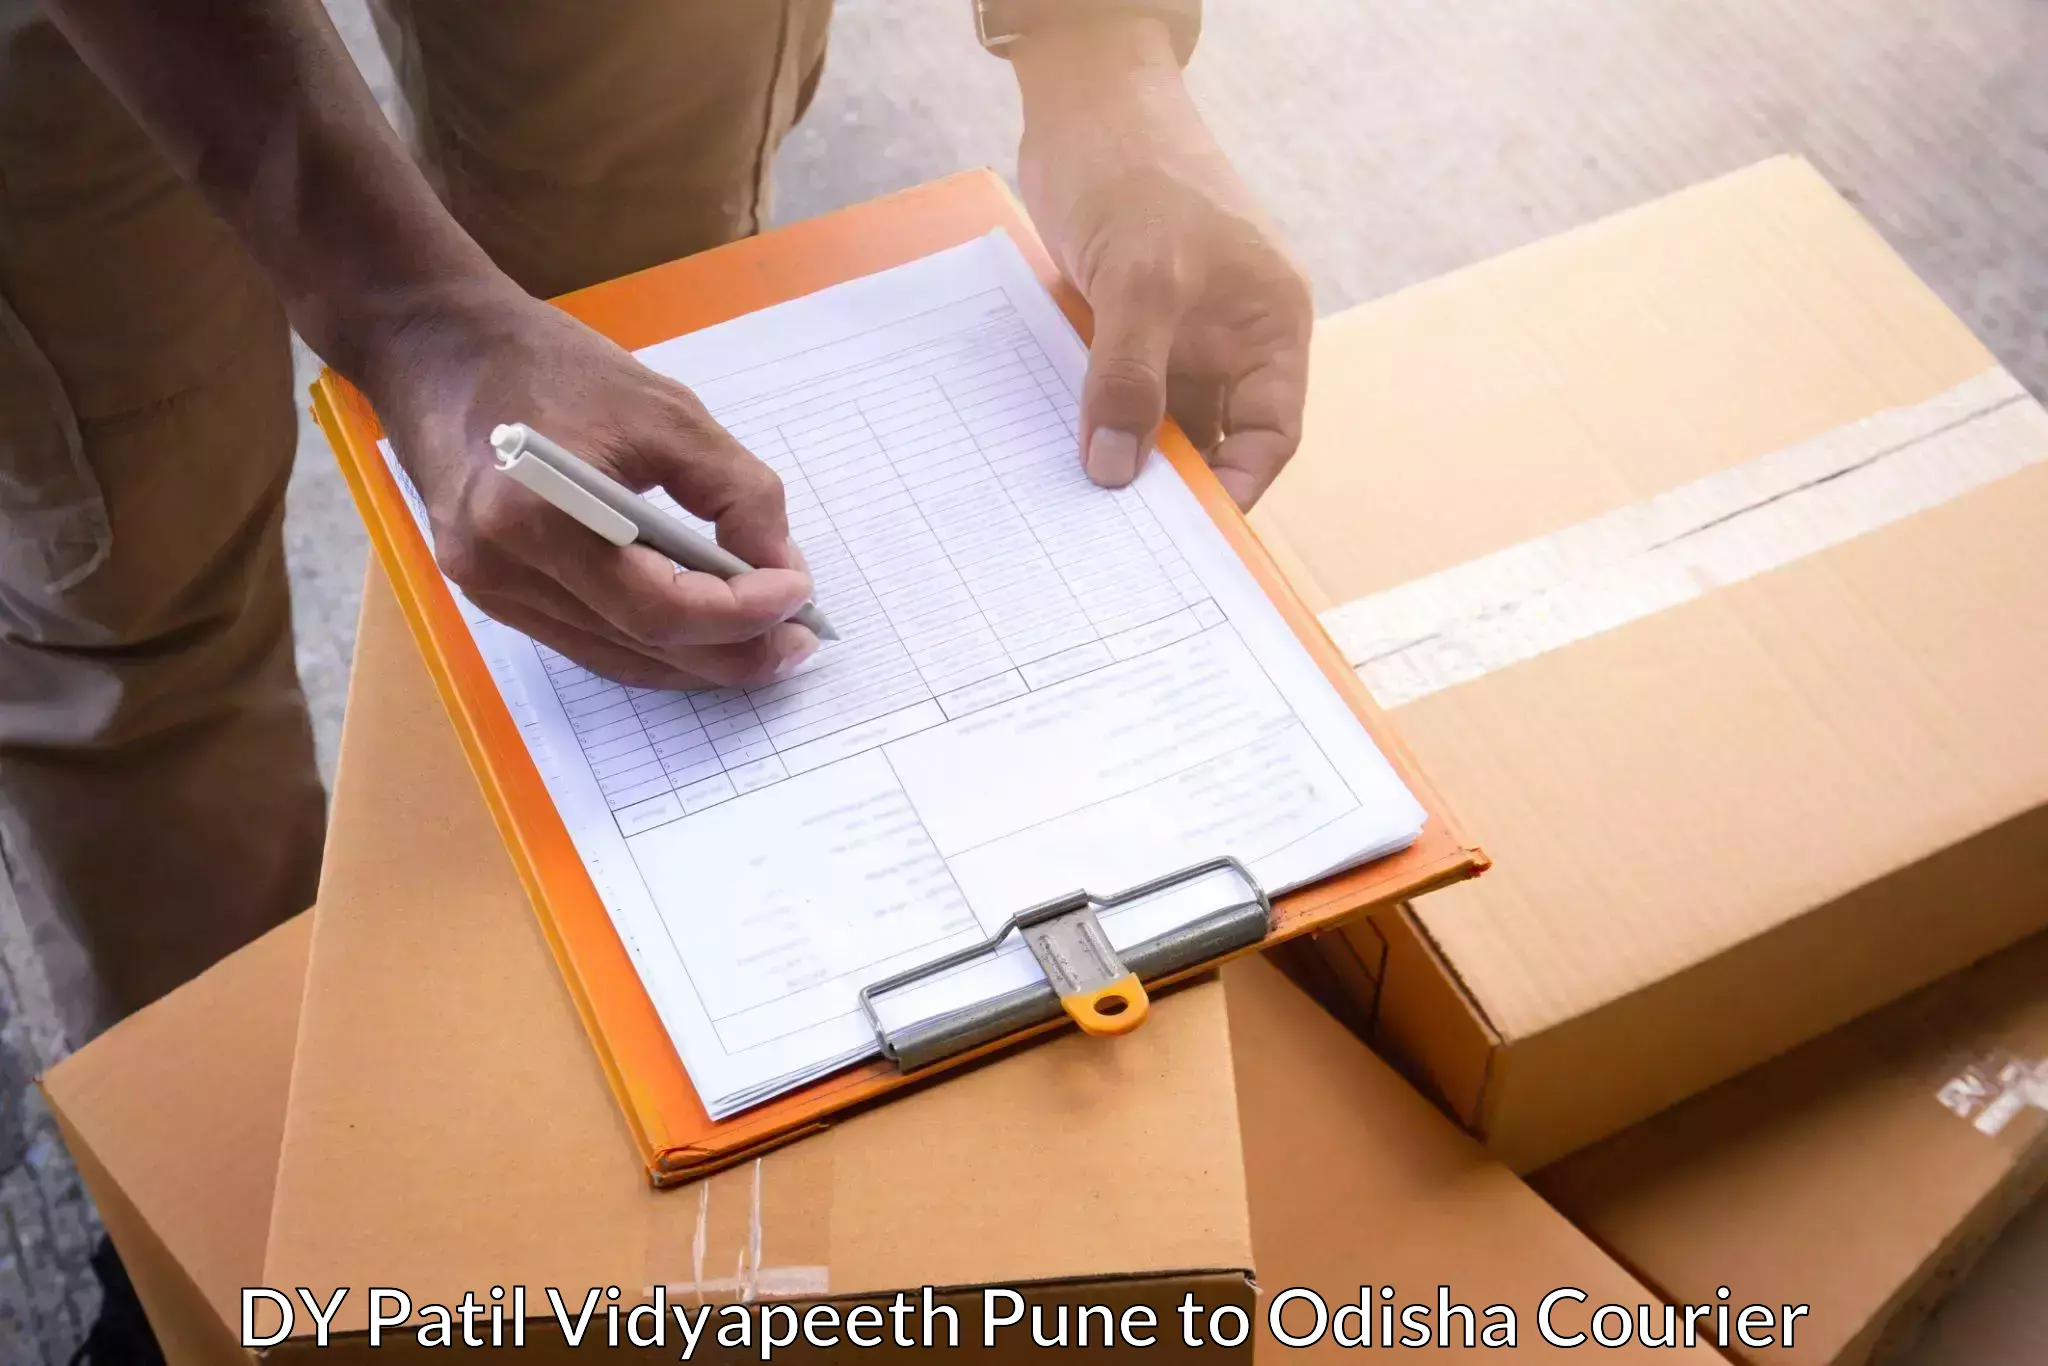 Nationwide courier service DY Patil Vidyapeeth Pune to Baleswar